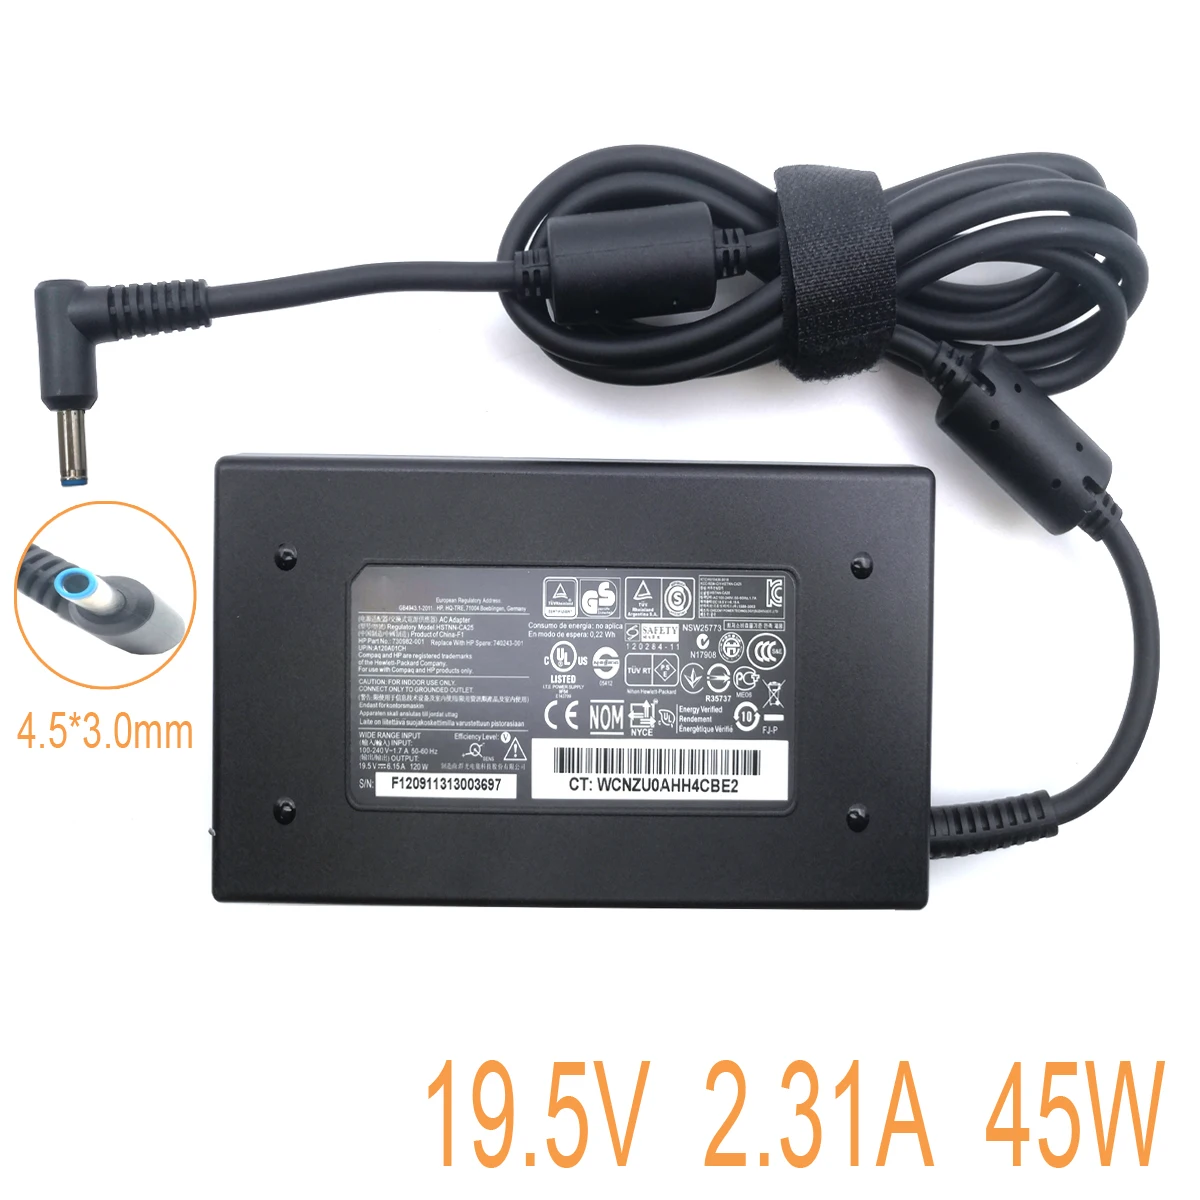 

19.5V 6.15A 120W 4.5*3.0mm Laptop Power Adapter Charger For HP ENVY 15-j059nr/i7-4700MQ Edition Notebook PA-1121-62HE HSTNN-CA25